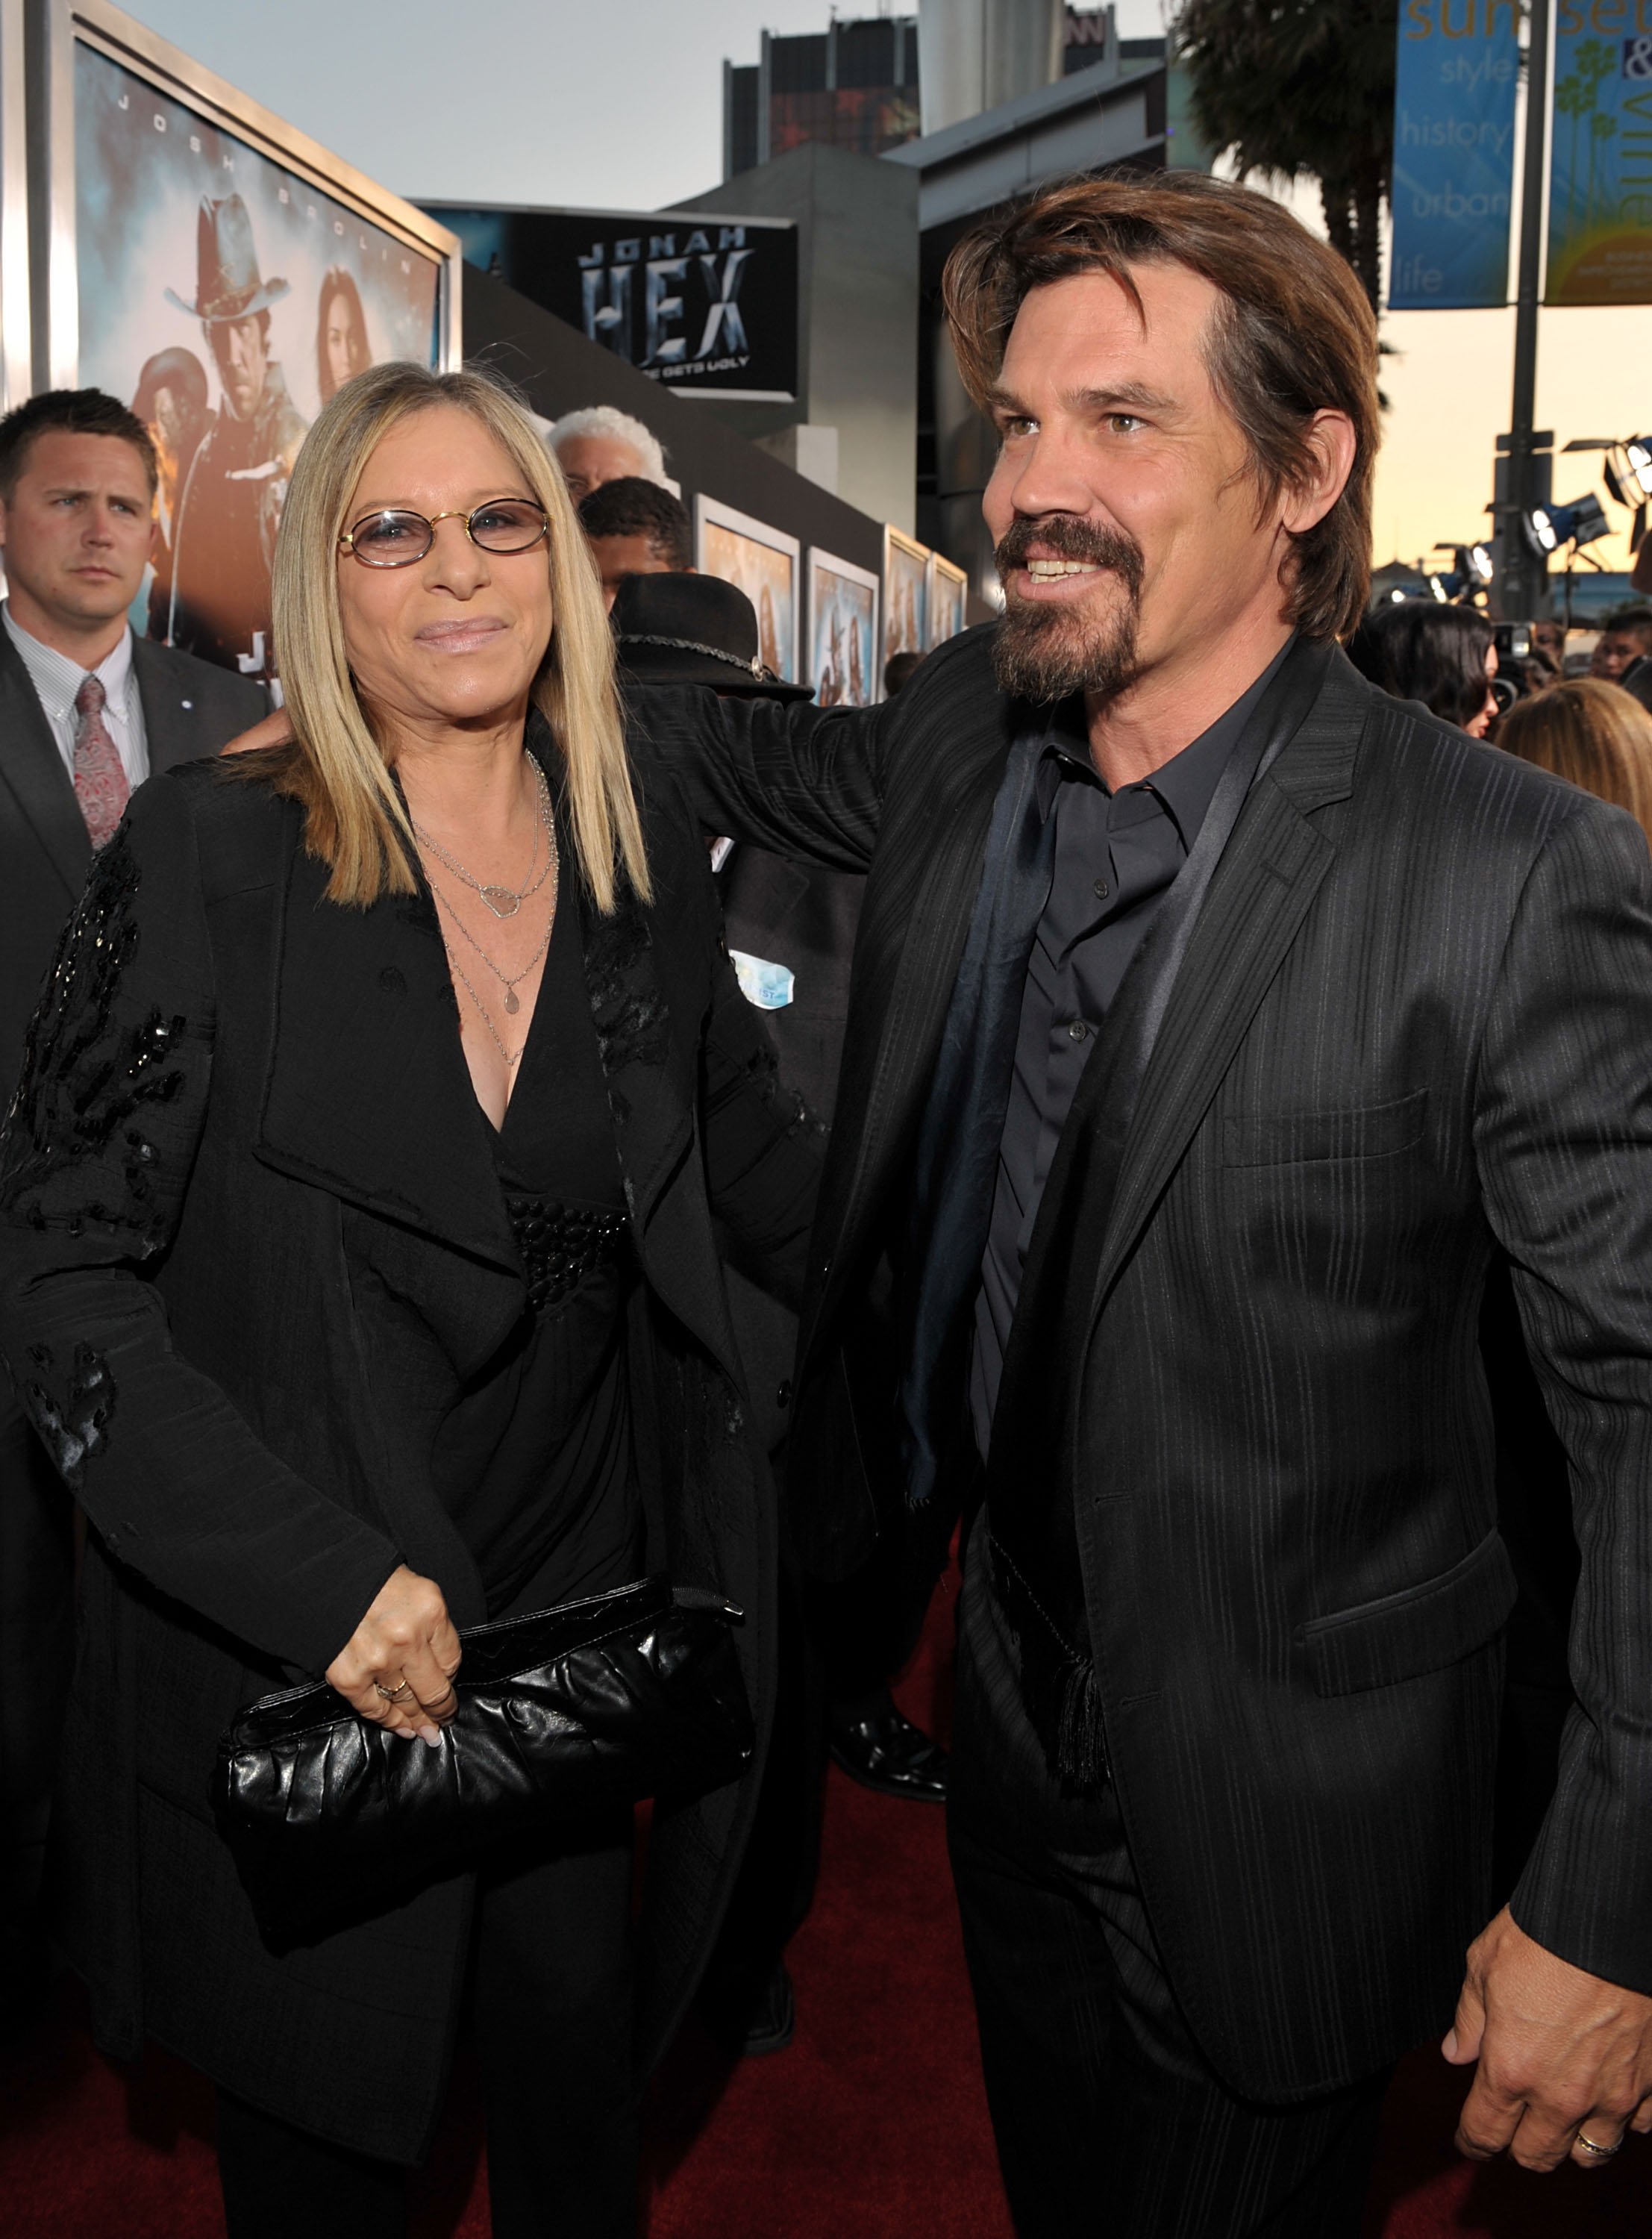 Actress Barbra Streisand and her stepson, actor Josh Brolin attend the "Jonah Hex" Los Angeles premiere at ArcLight Cinemas Cinerama Dome on June 17, 2010 in Hollywood, California ┃Source: Getty Images